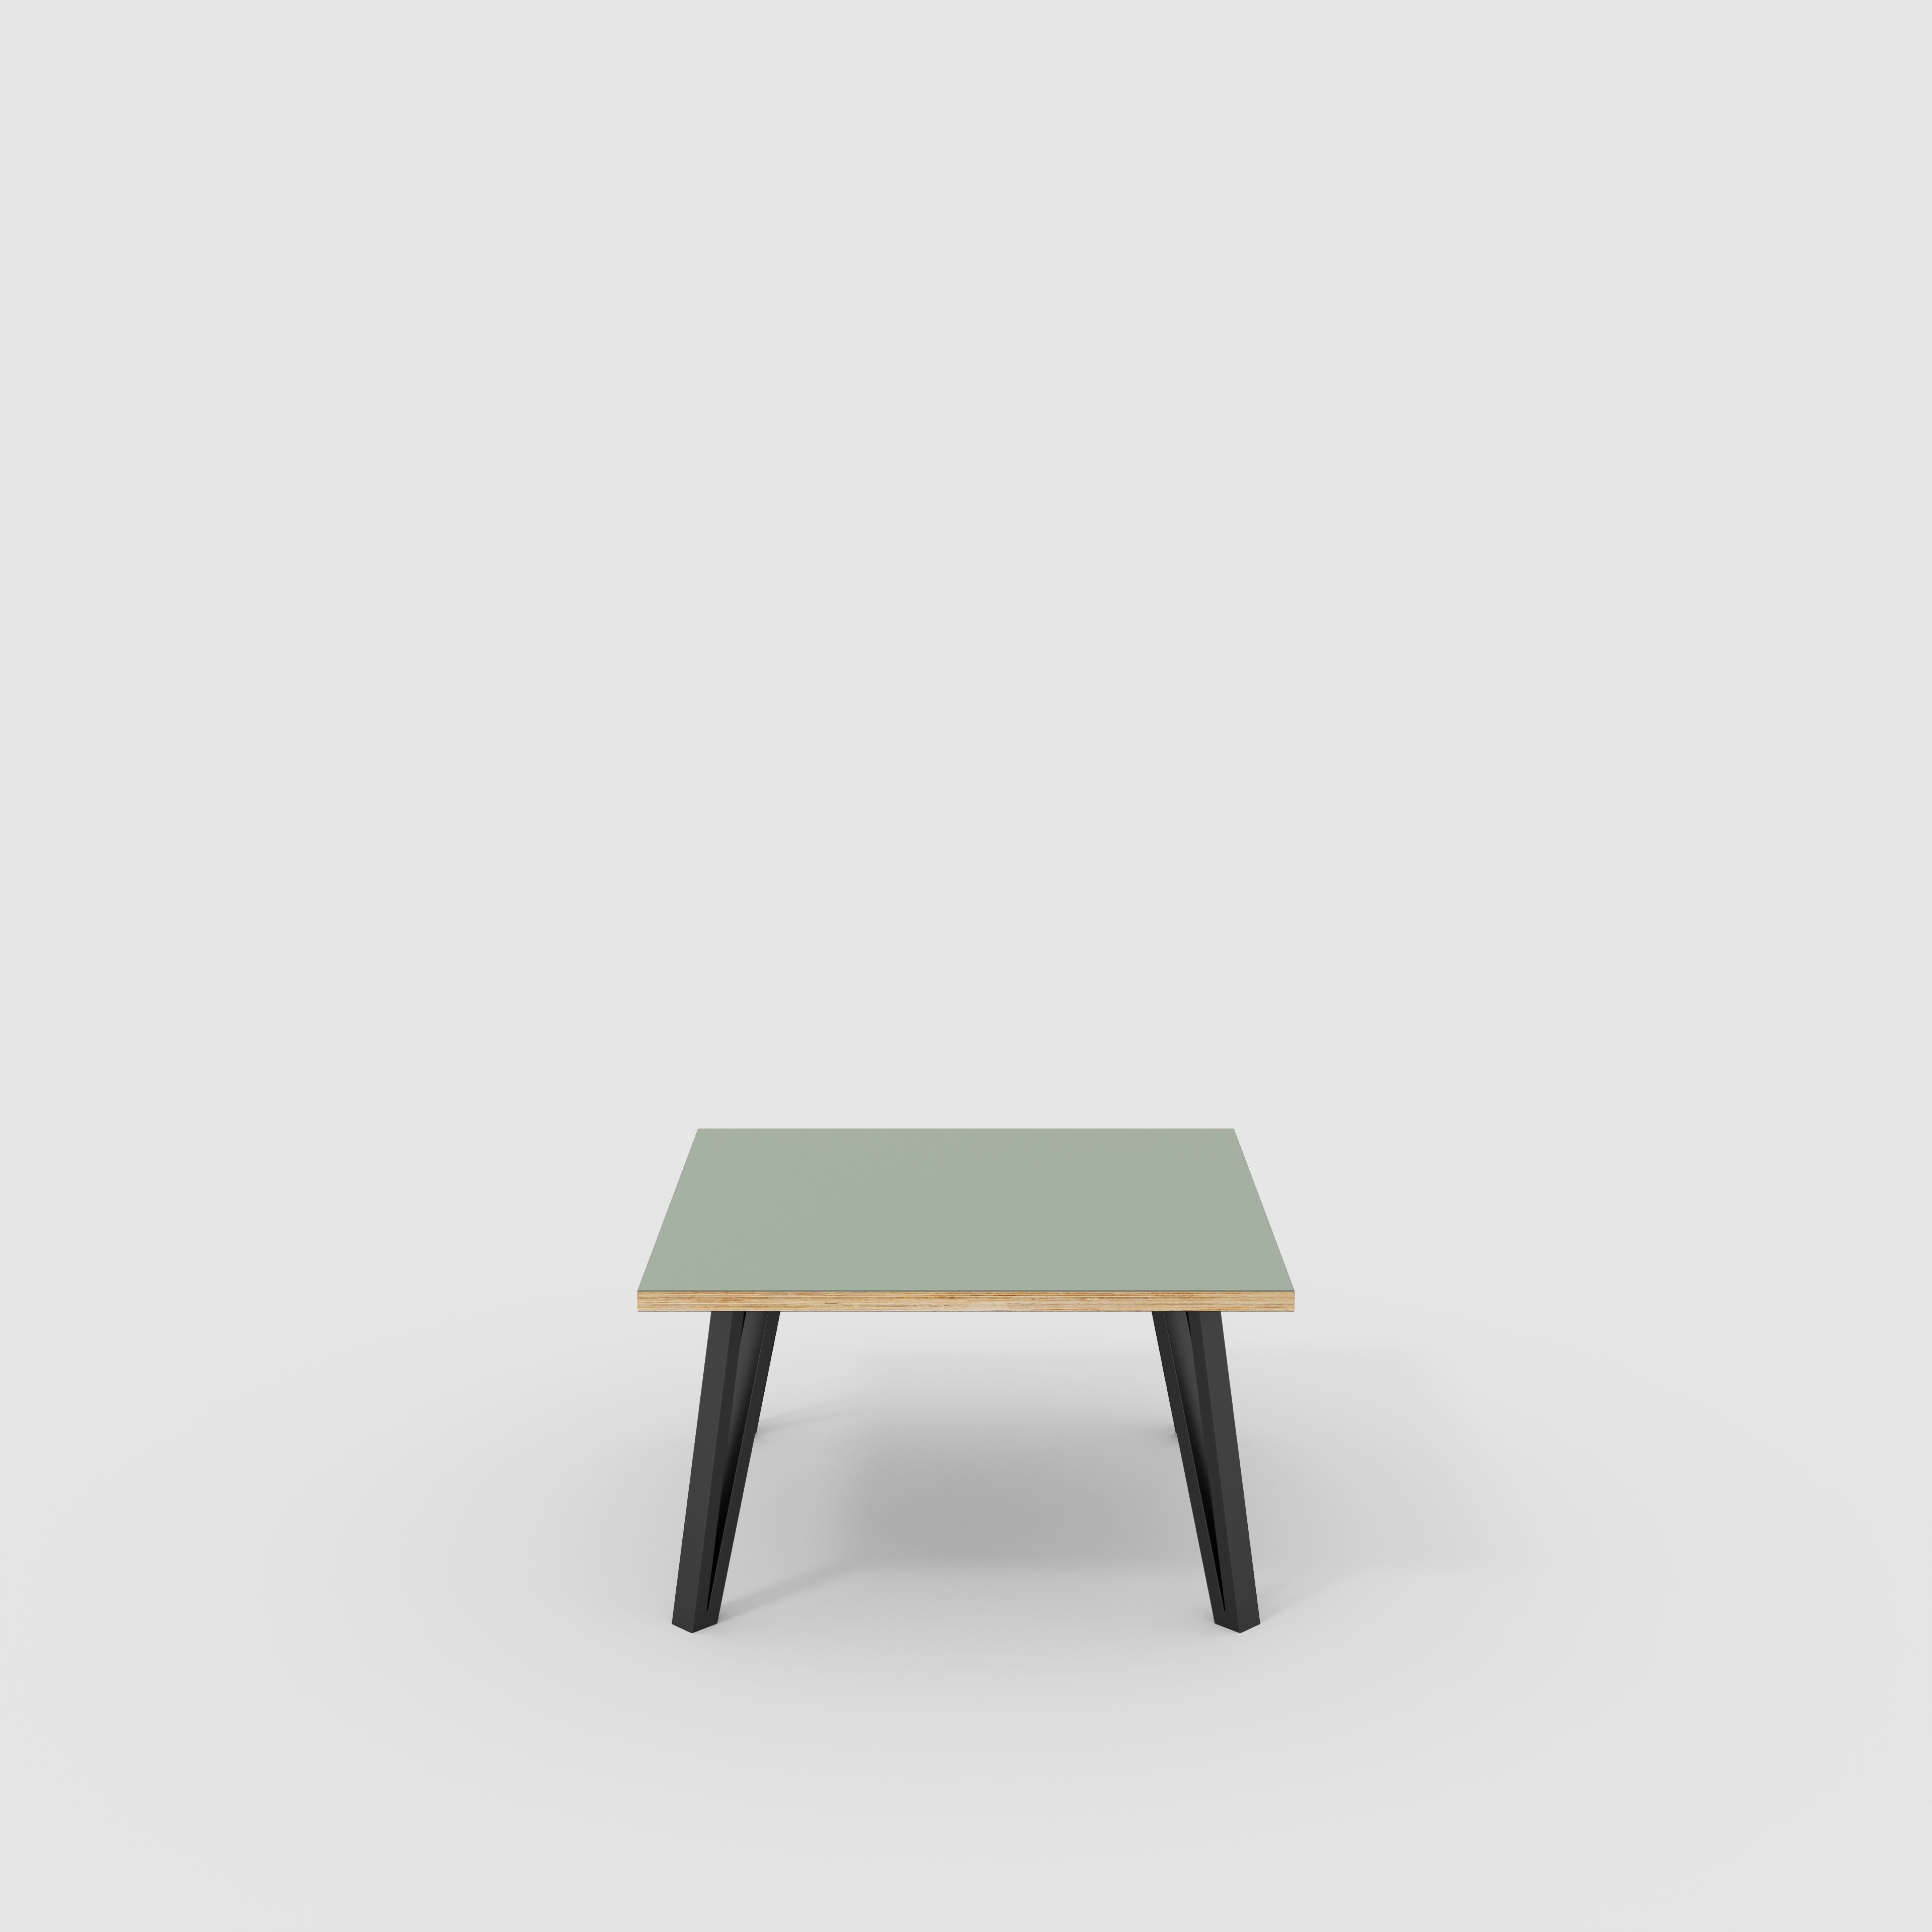 Coffee Table with Black Box Hairpin Legs - Formica Green Slate - 800(w) x 800(d) x 425(h)